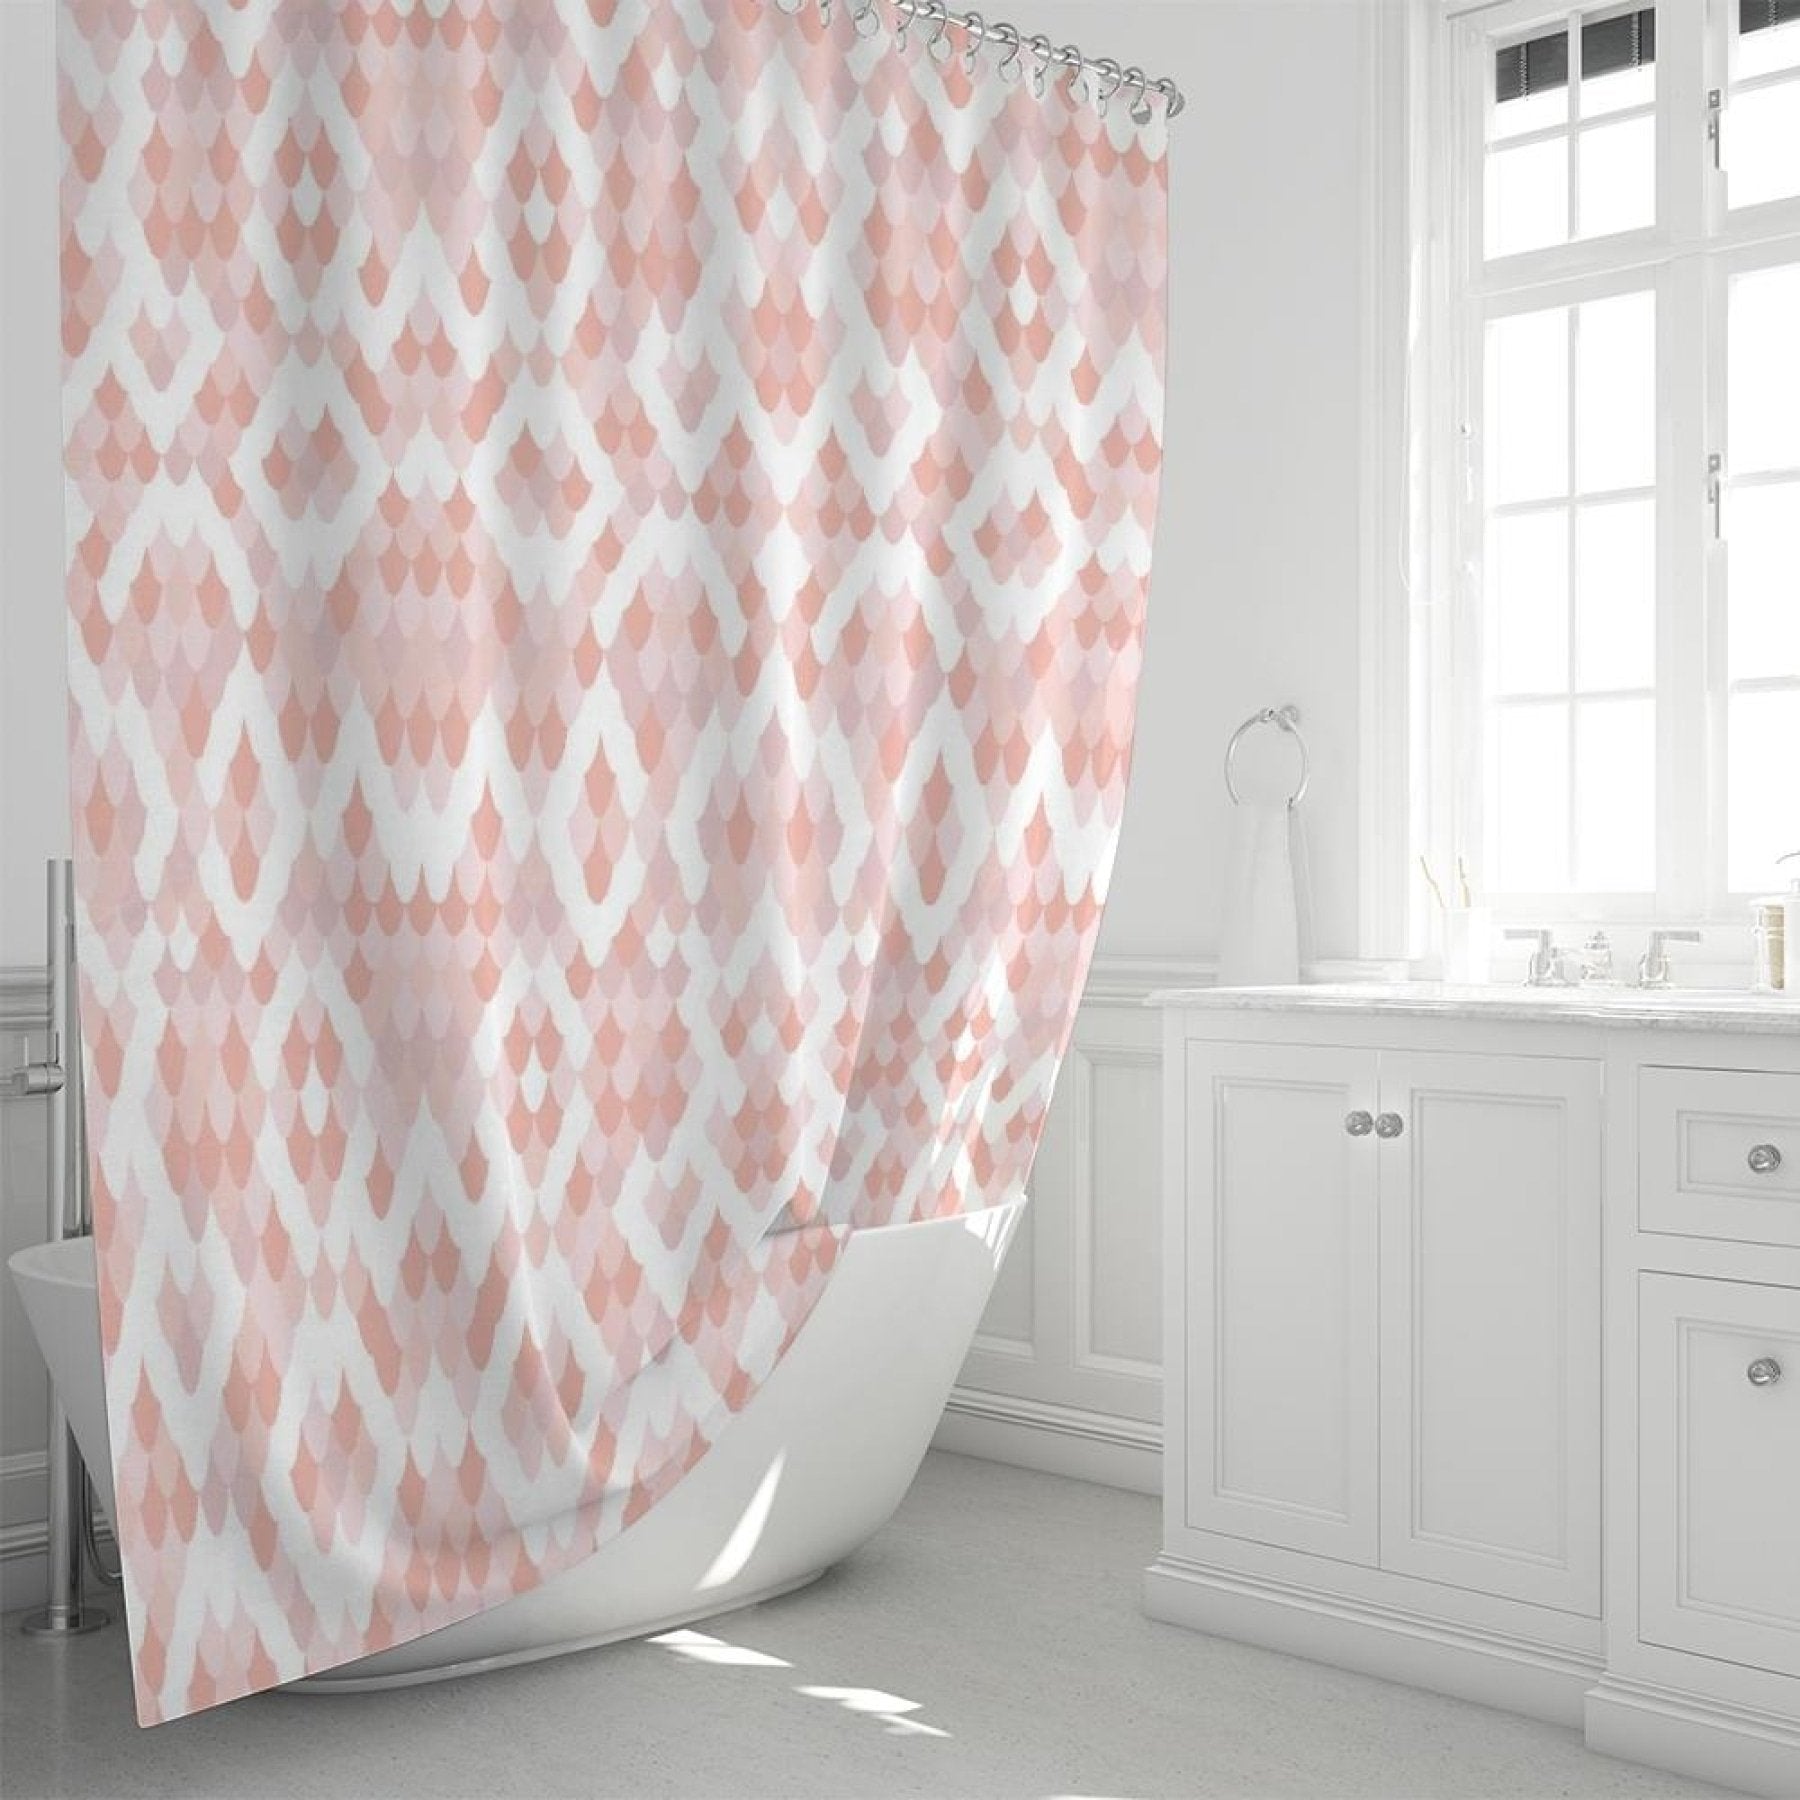 Pearly Pink Shower Curtain 72"X72"